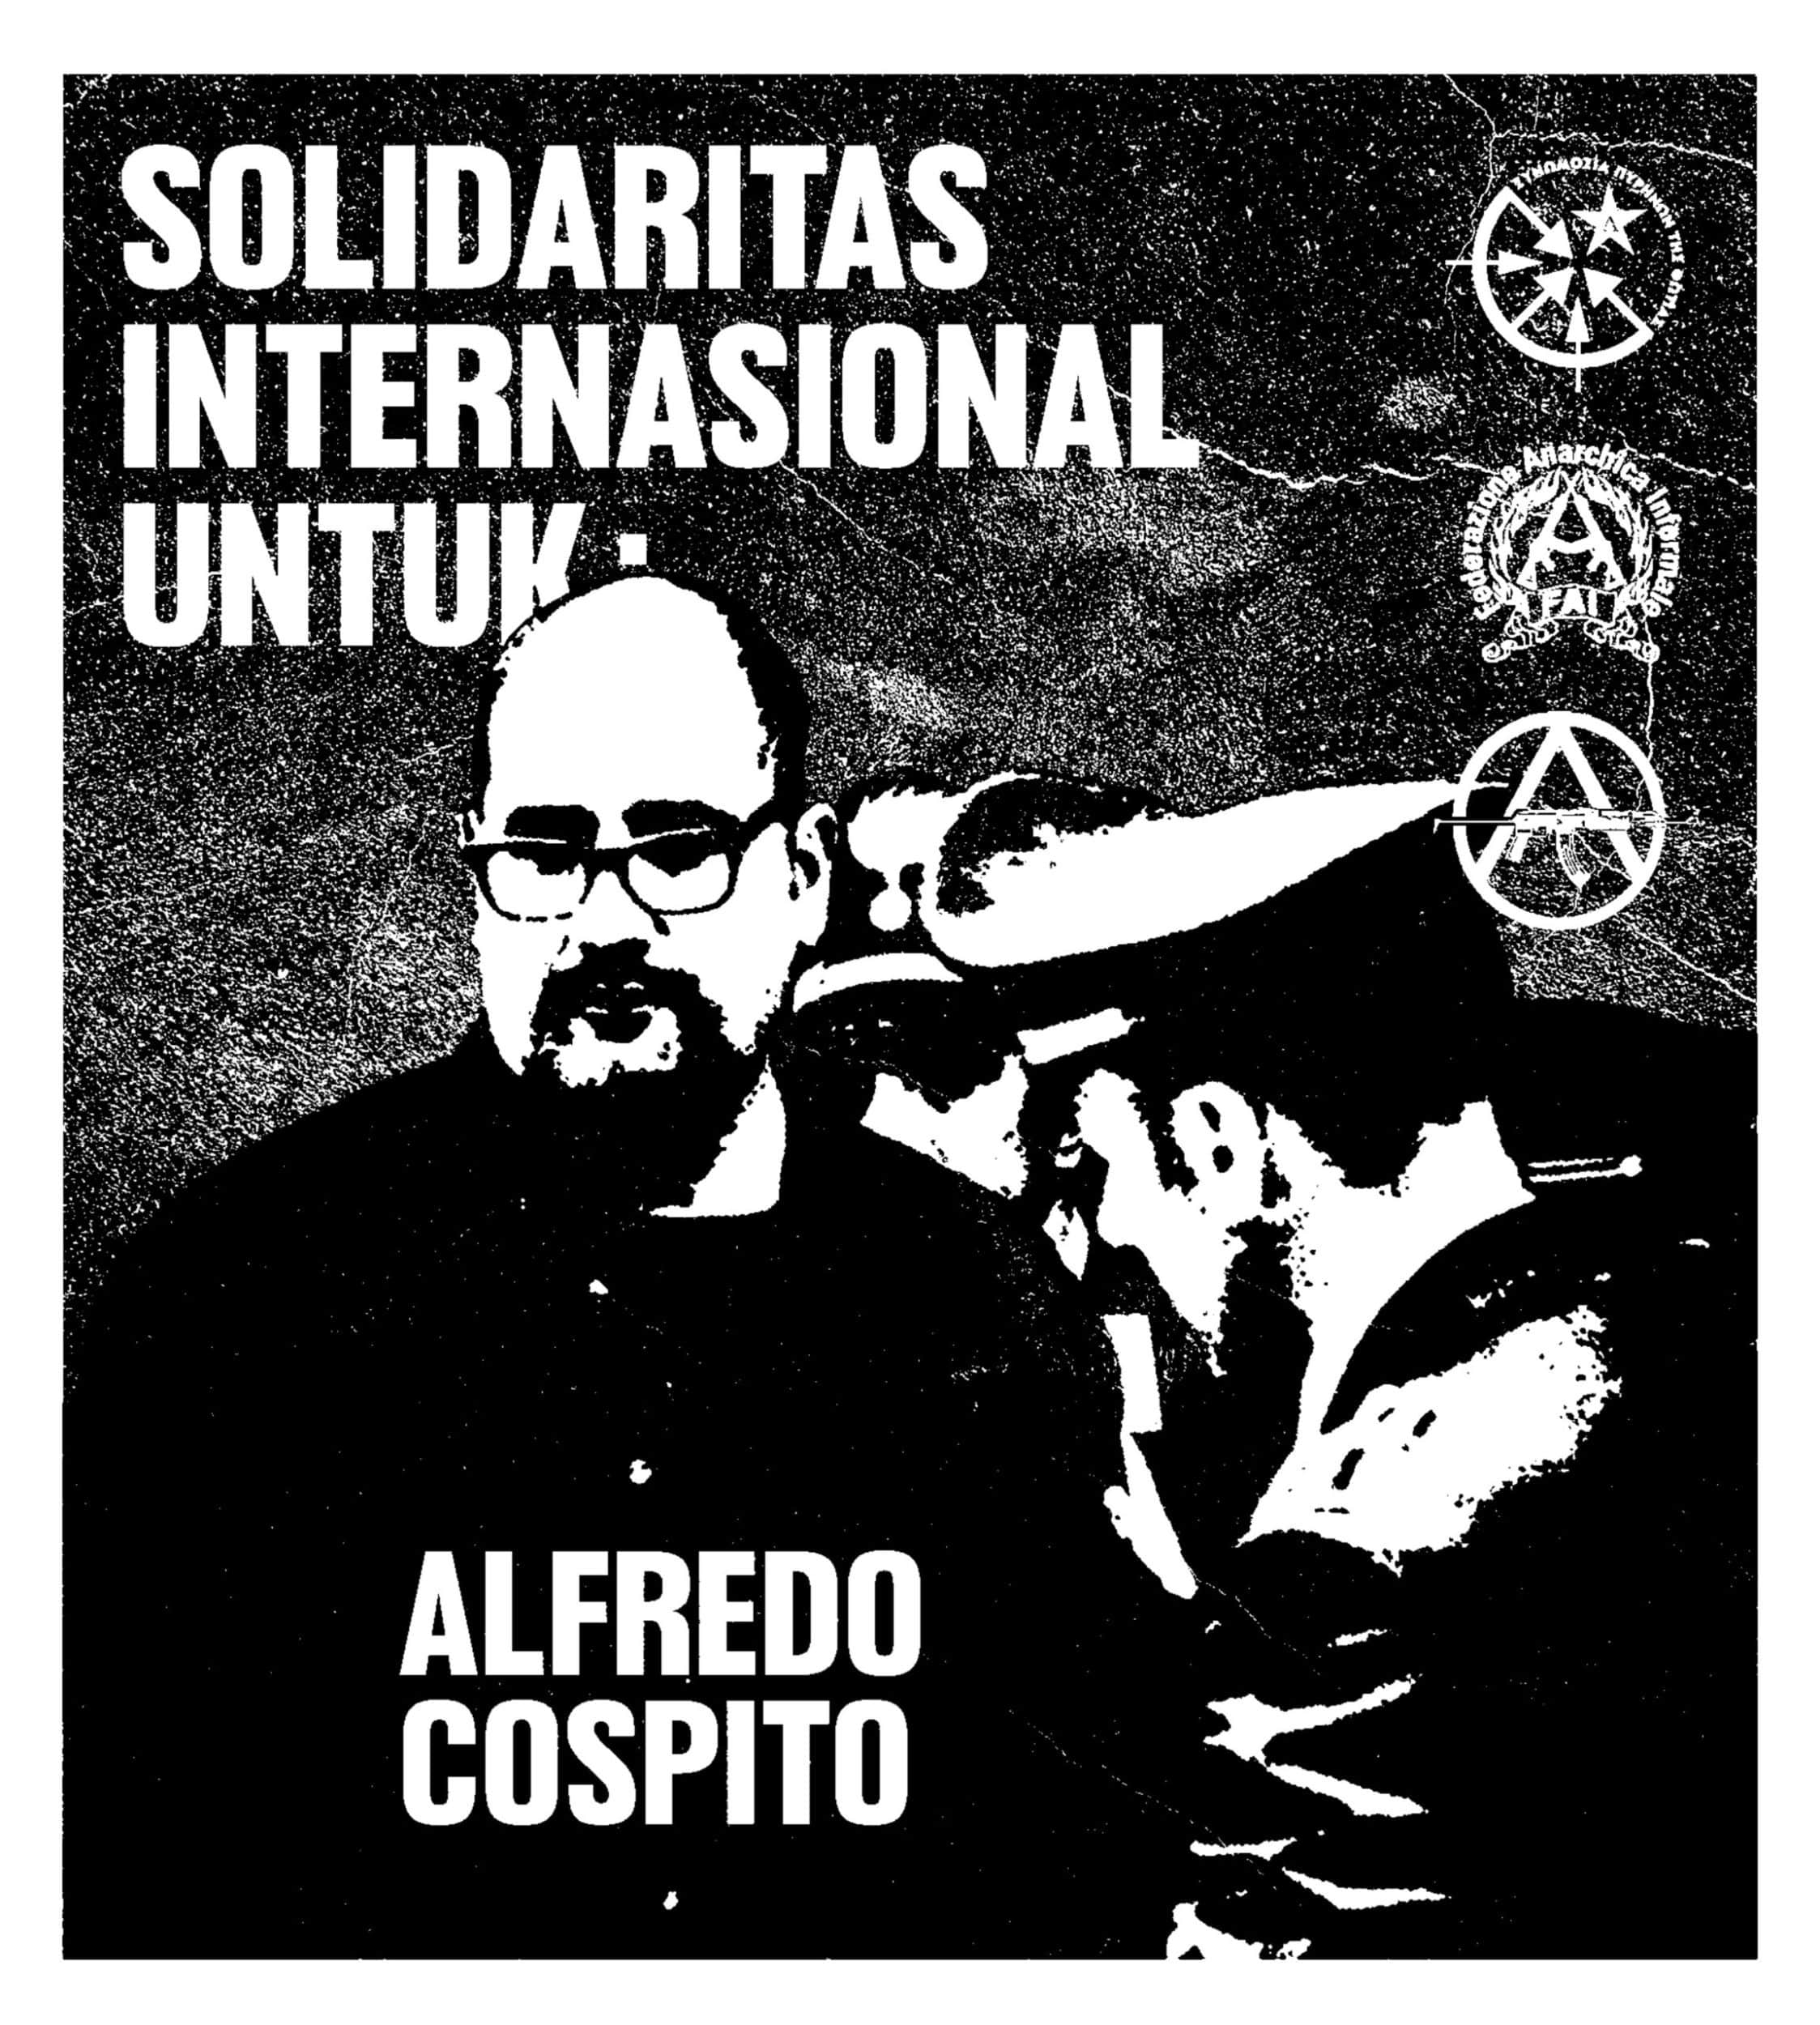 (Posters) Indonesian Anarchists Share Solidarity Posters with Alfredo Cospito from Indonesia - 13 February 2023